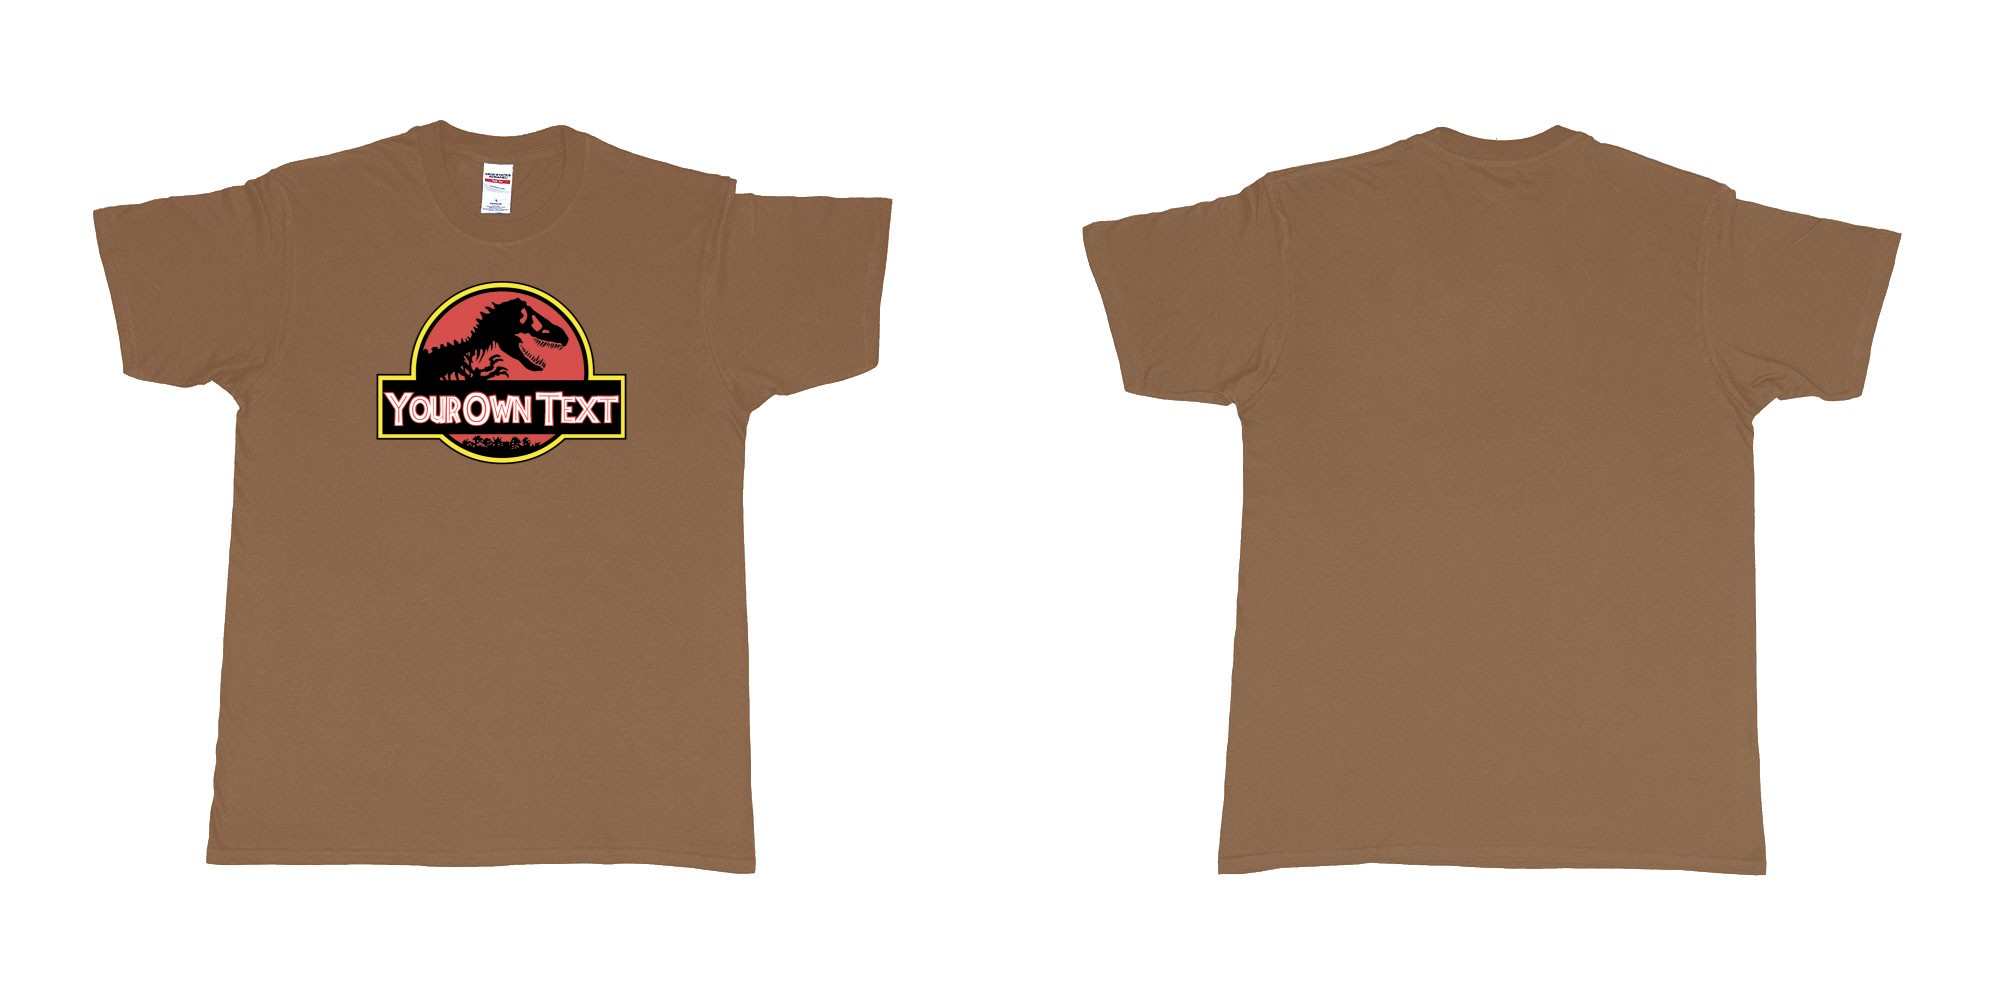 Custom tshirt design Jurassic Park in fabric color chestnut choice your own text made in Bali by The Pirate Way